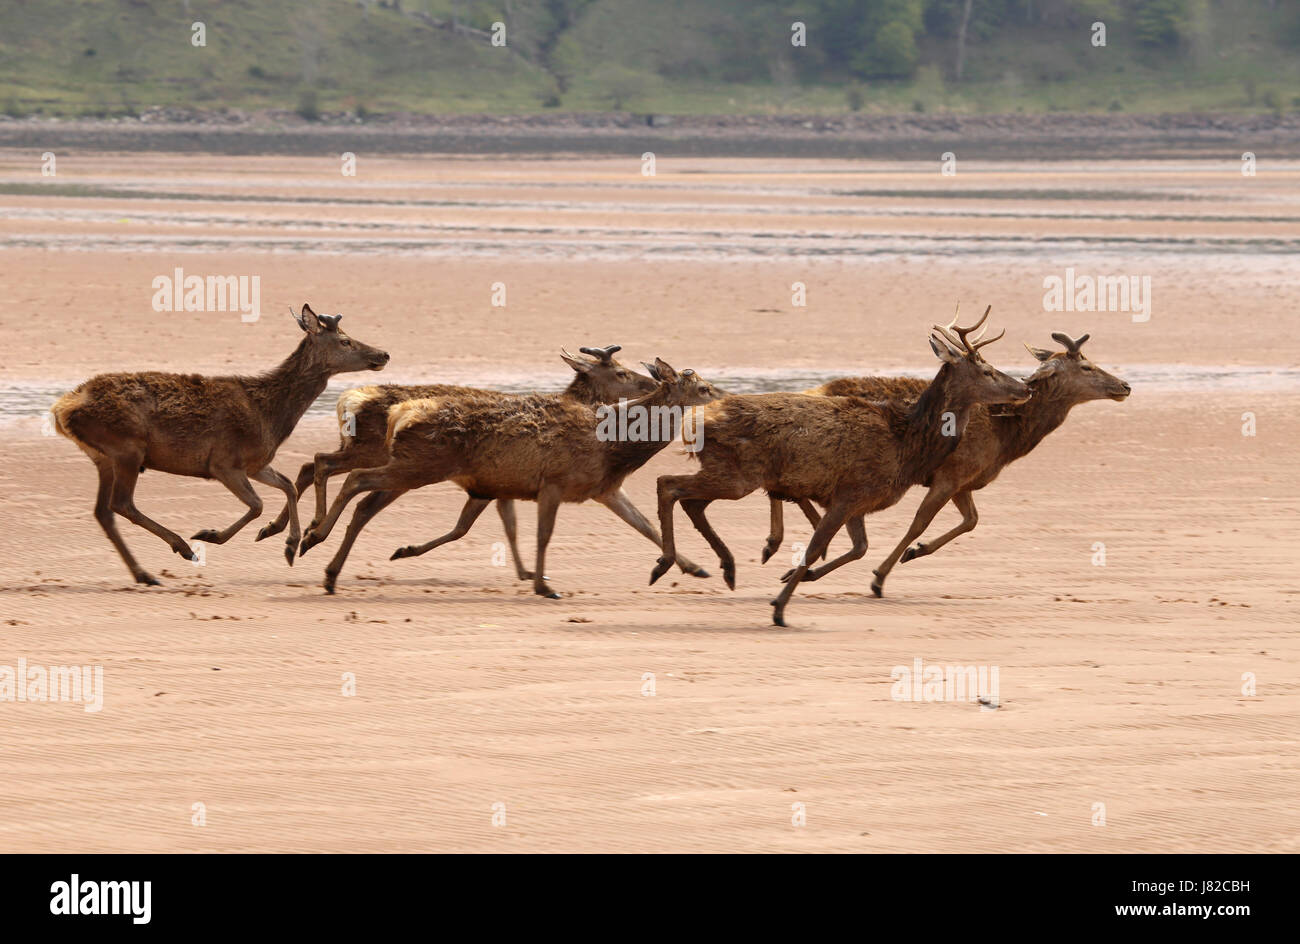 A group of young red deer stags running across the beach in Applecross Bay, Wester Ross, Scottish Highlands, UK. Stock Photo